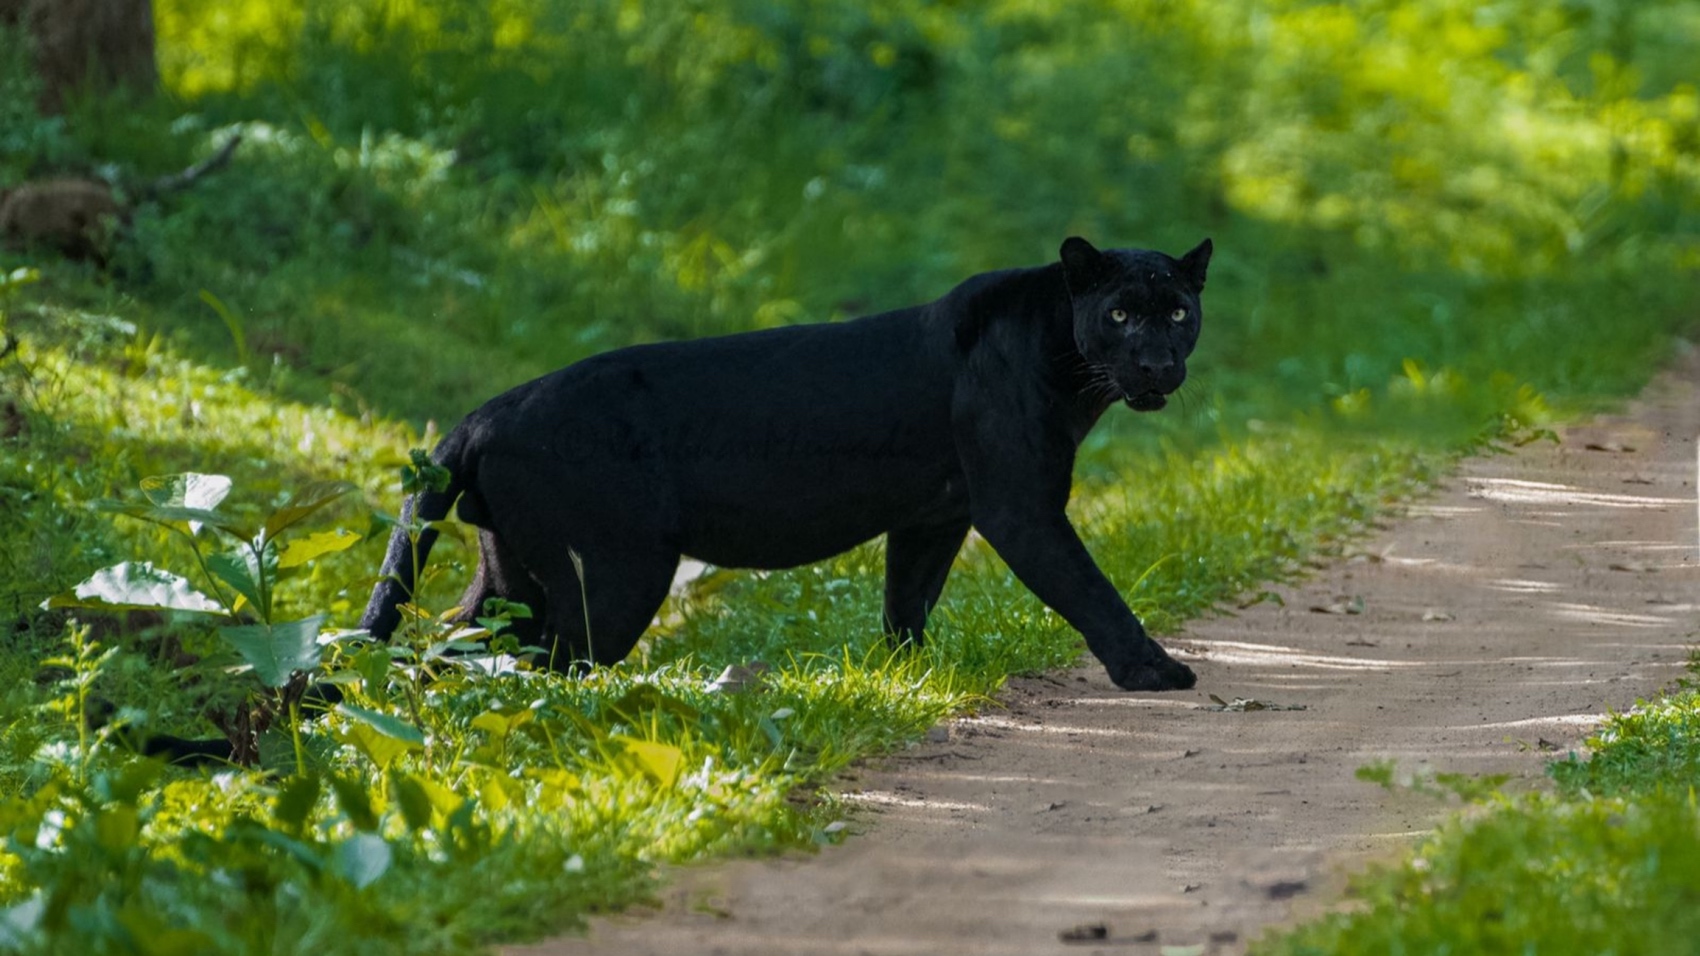 Louisiana Residents Claim Rare Black Panther Sightings Occur